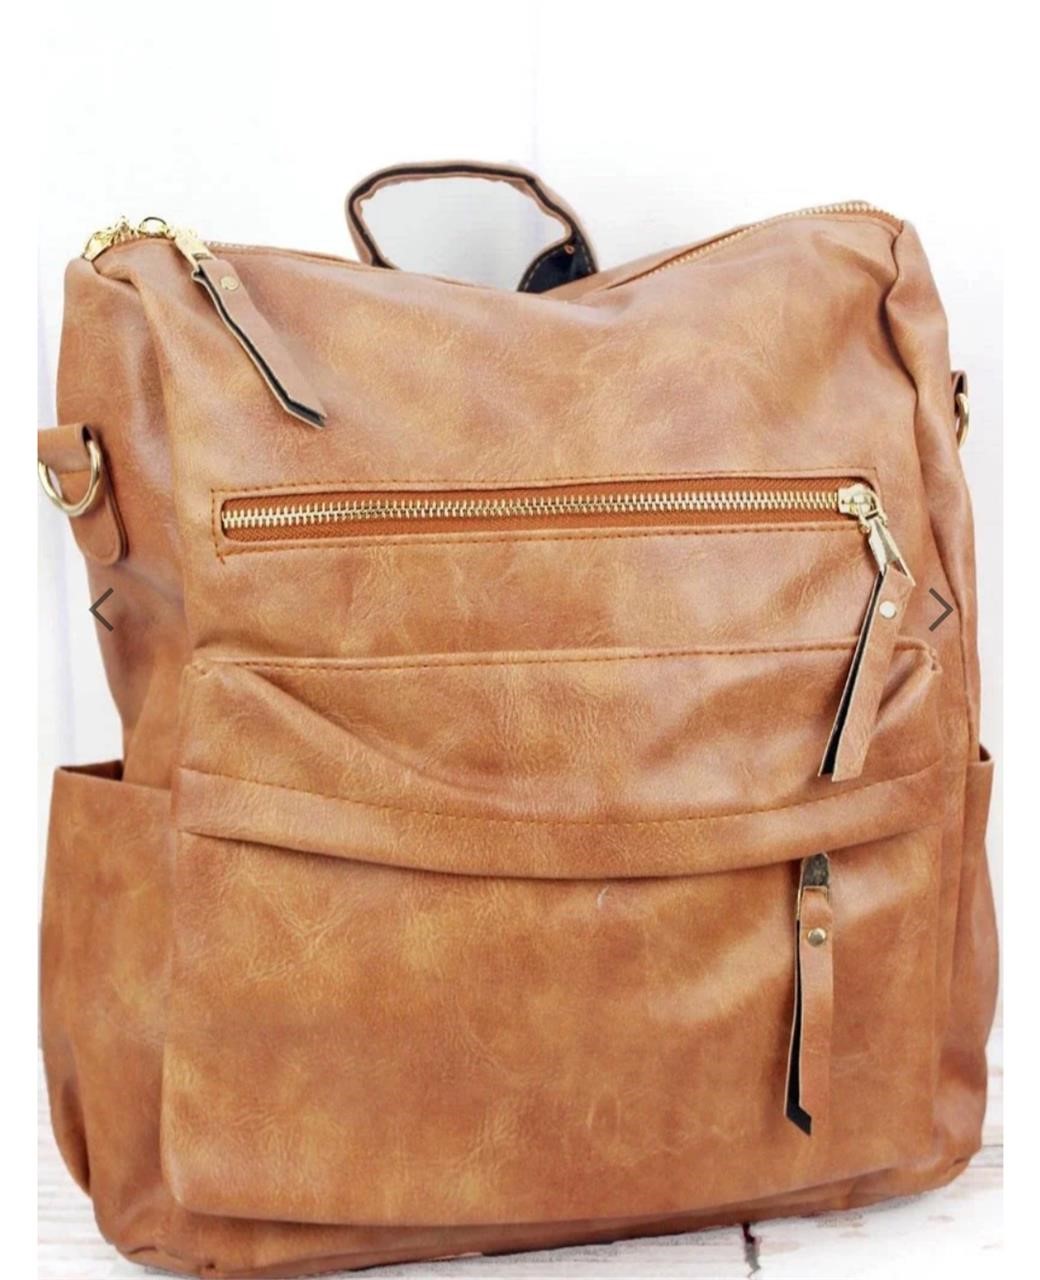 Aiseyi Faux leather backpack brown purse